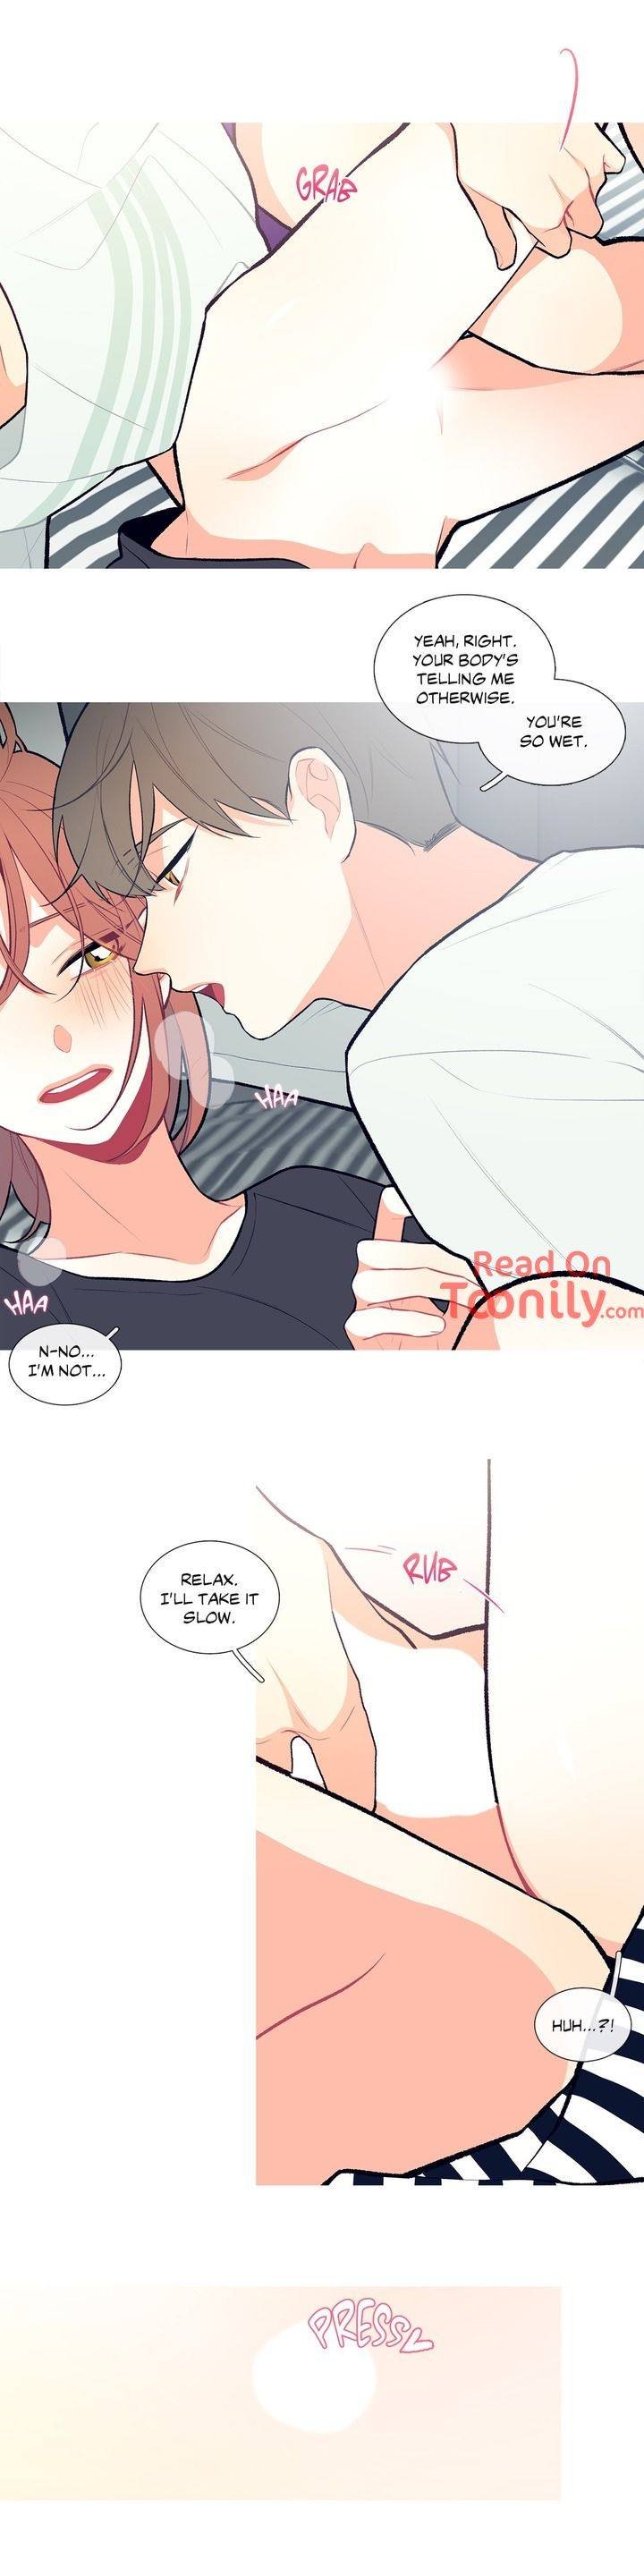 whats-going-on-chap-4-10